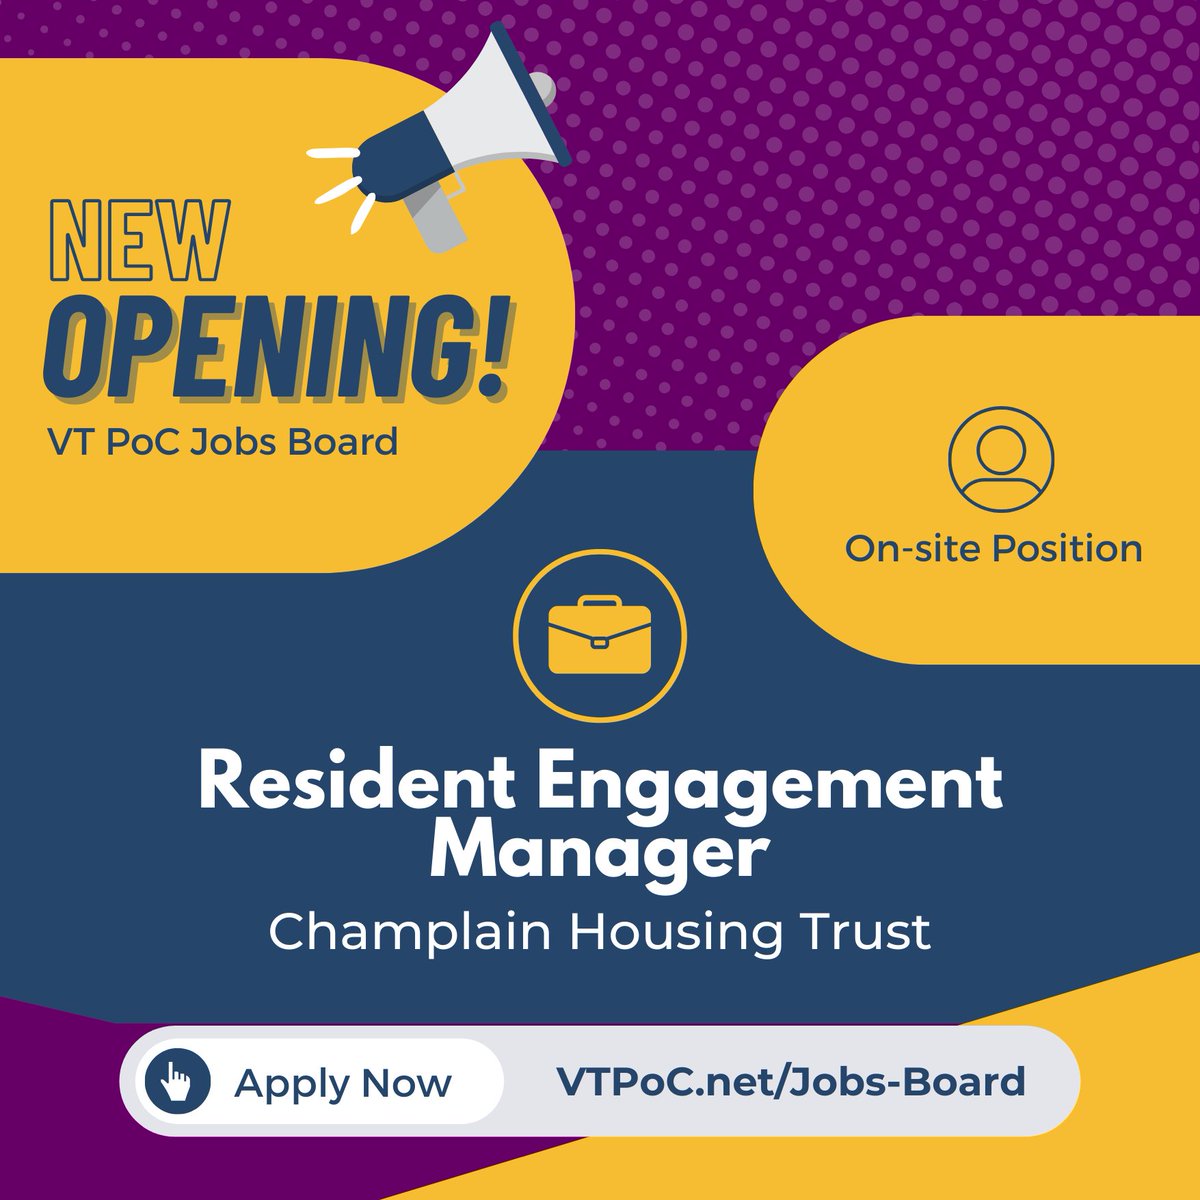 New year, new opportunities! If you're looking for something new, check out the Jobs Board for new openings! Right now, @chtrust is recruiting a Resident Engagement Manager. Visit the Jobs Board: bit.ly/3vTfXMX